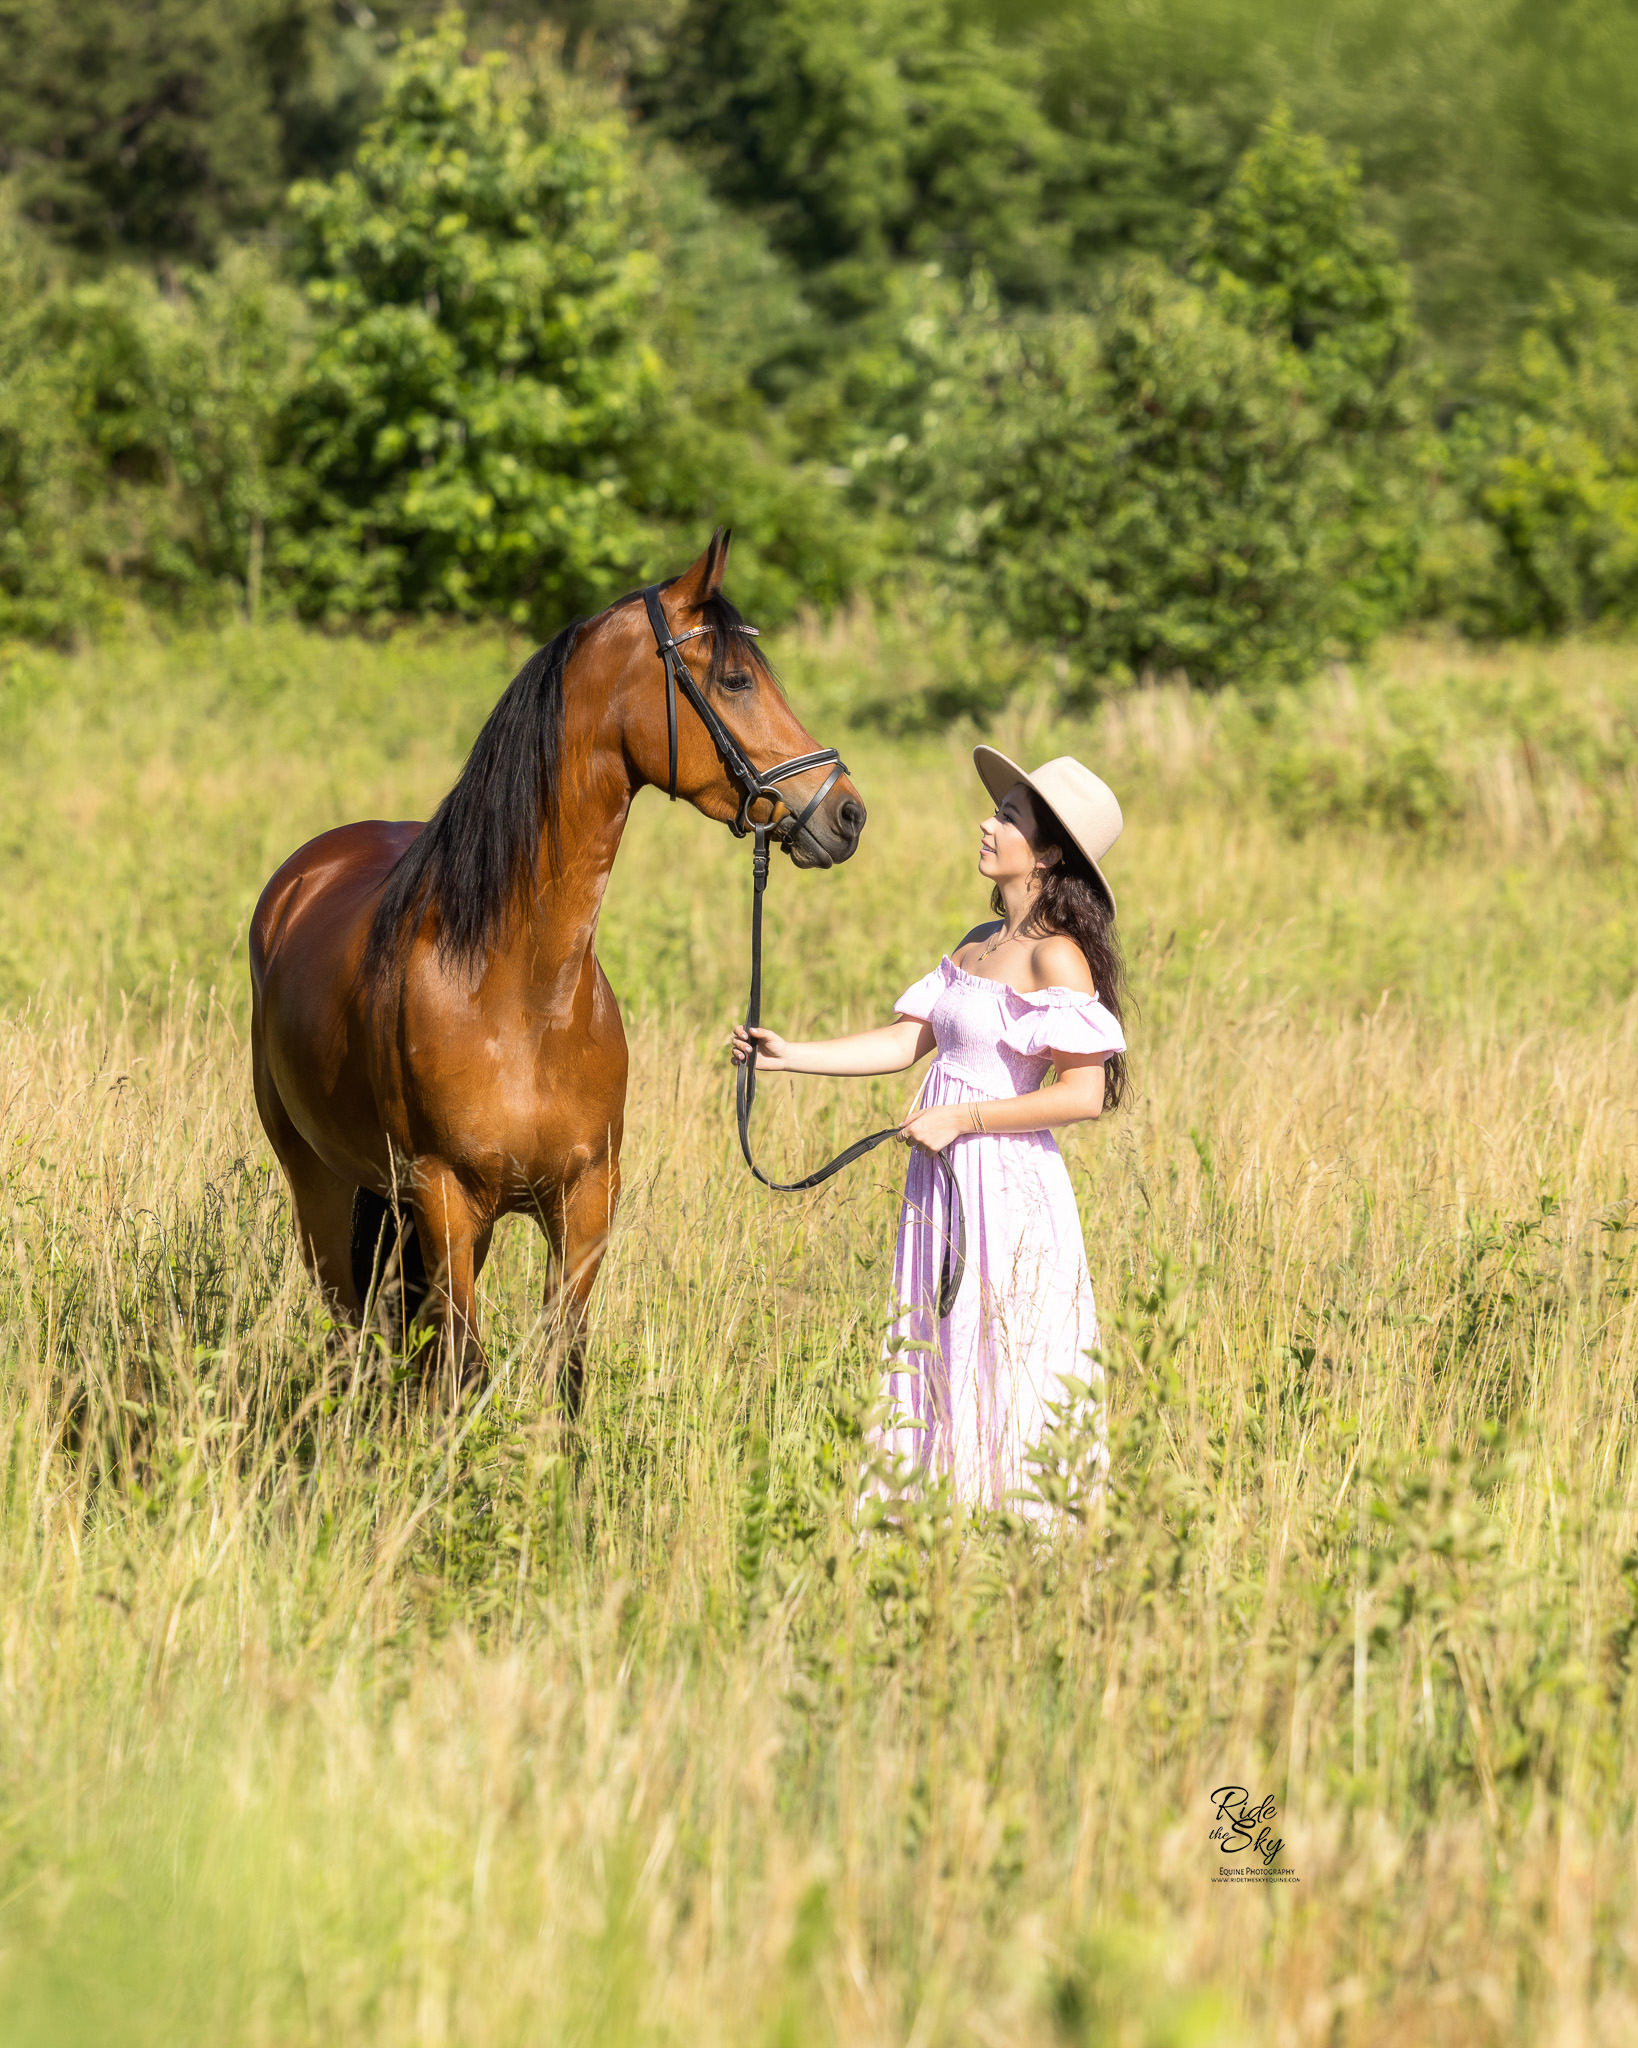 High School Senior photographed with her horse in field